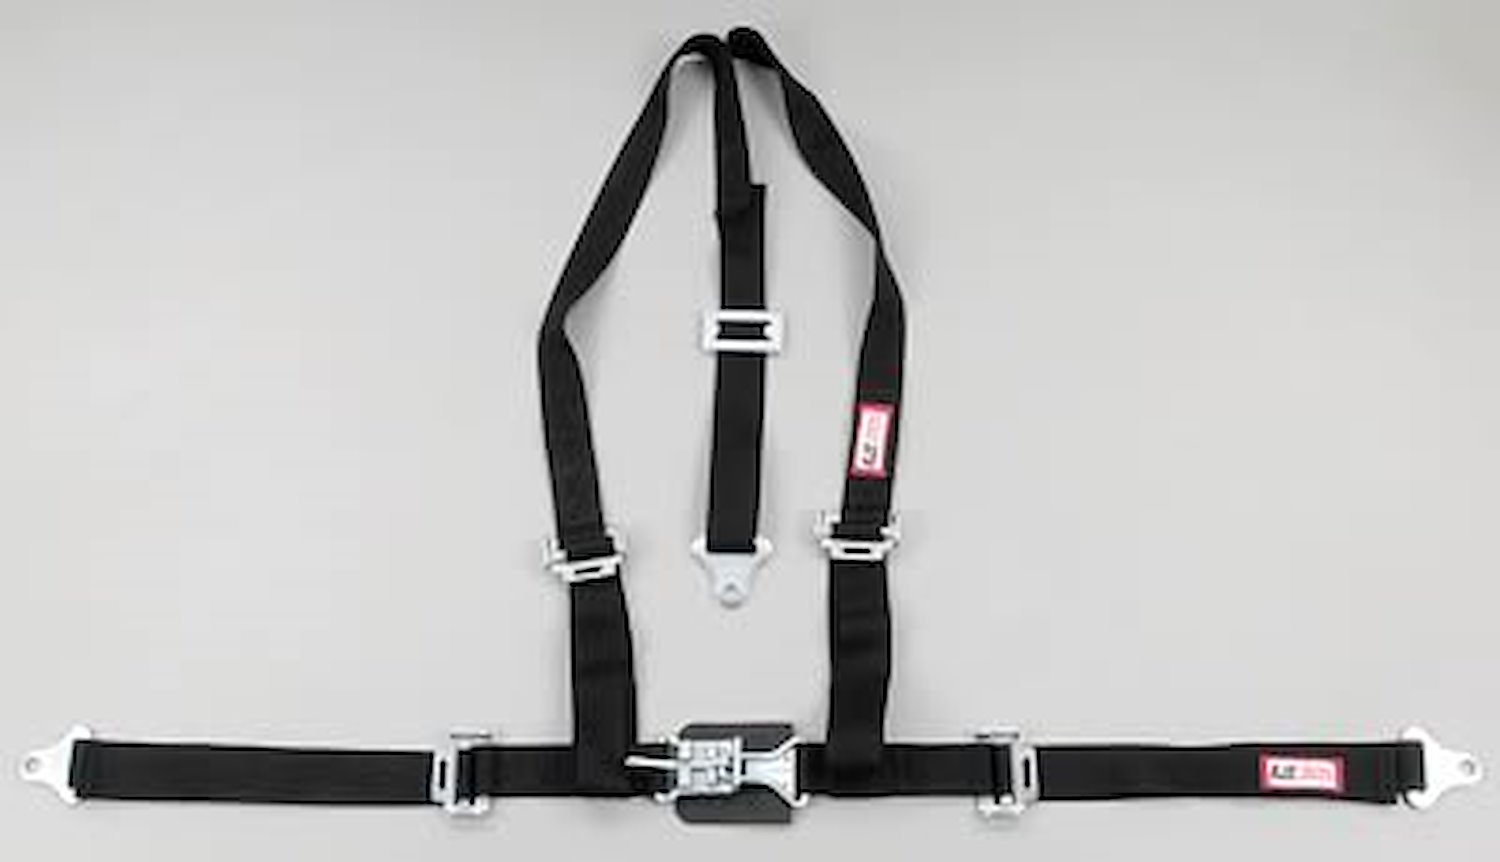 NON-SFI L&L HARNESS 3 PULL DOWN Lap Belt w/Adjuster SNAP 2 S.H. Y FLOOR Mount w/STERNUM STRAP WRAP/SNAP GRAY